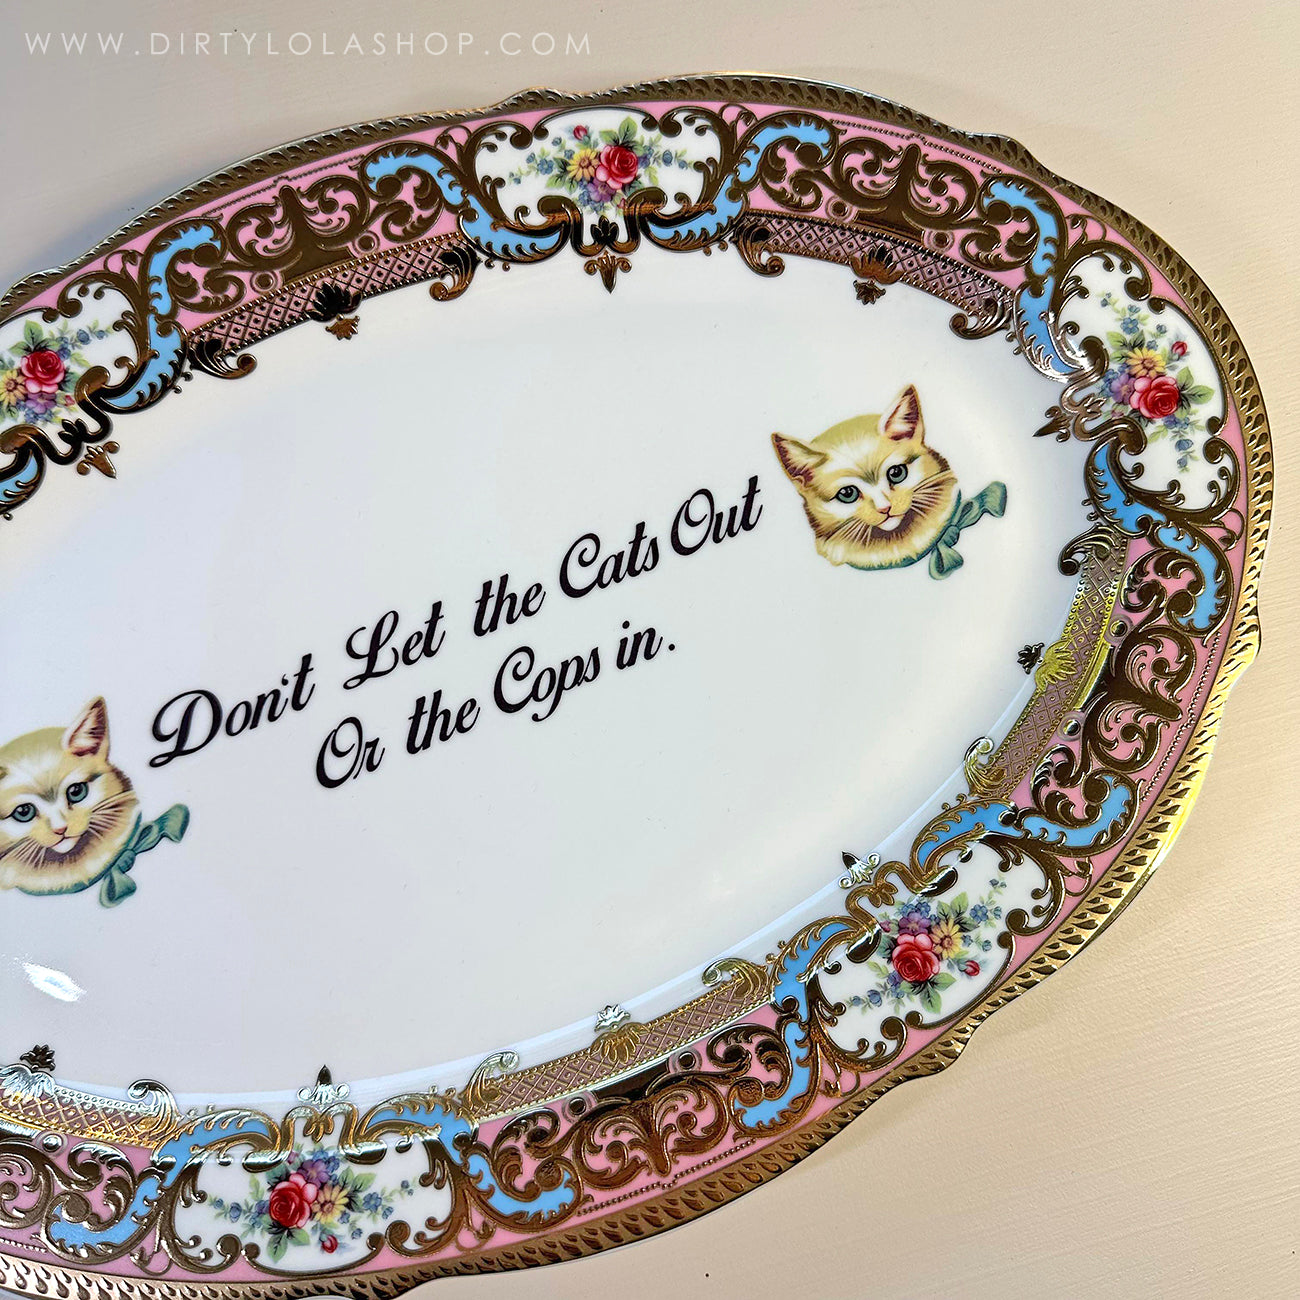 PRE-ORDER - NEW -  Antique Style Platter - "Don't Let the Cats Out or the Cops in."